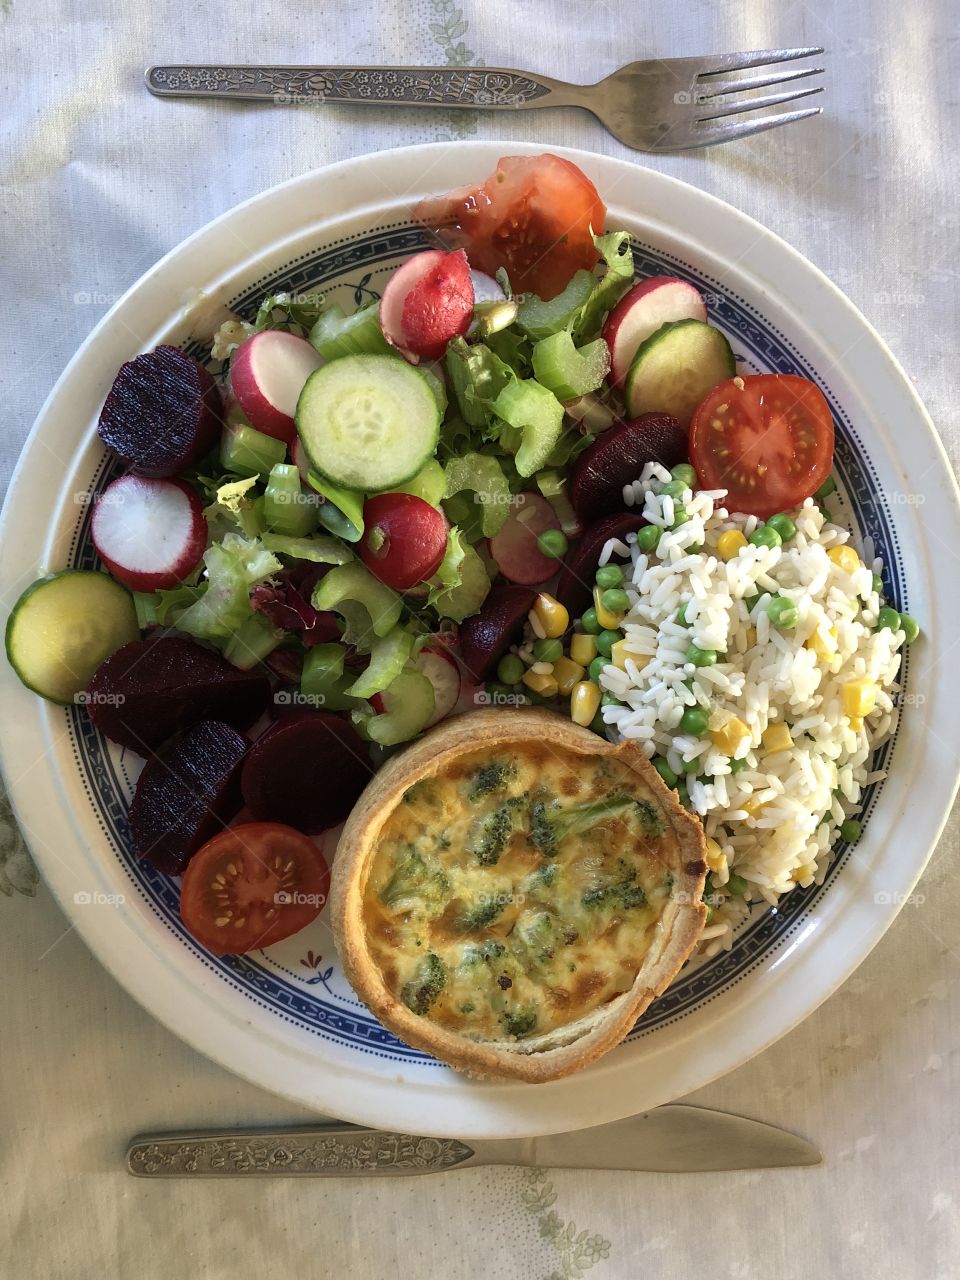 A lovely cheese quiche salad for a gloriously sunny day in Devon, UK